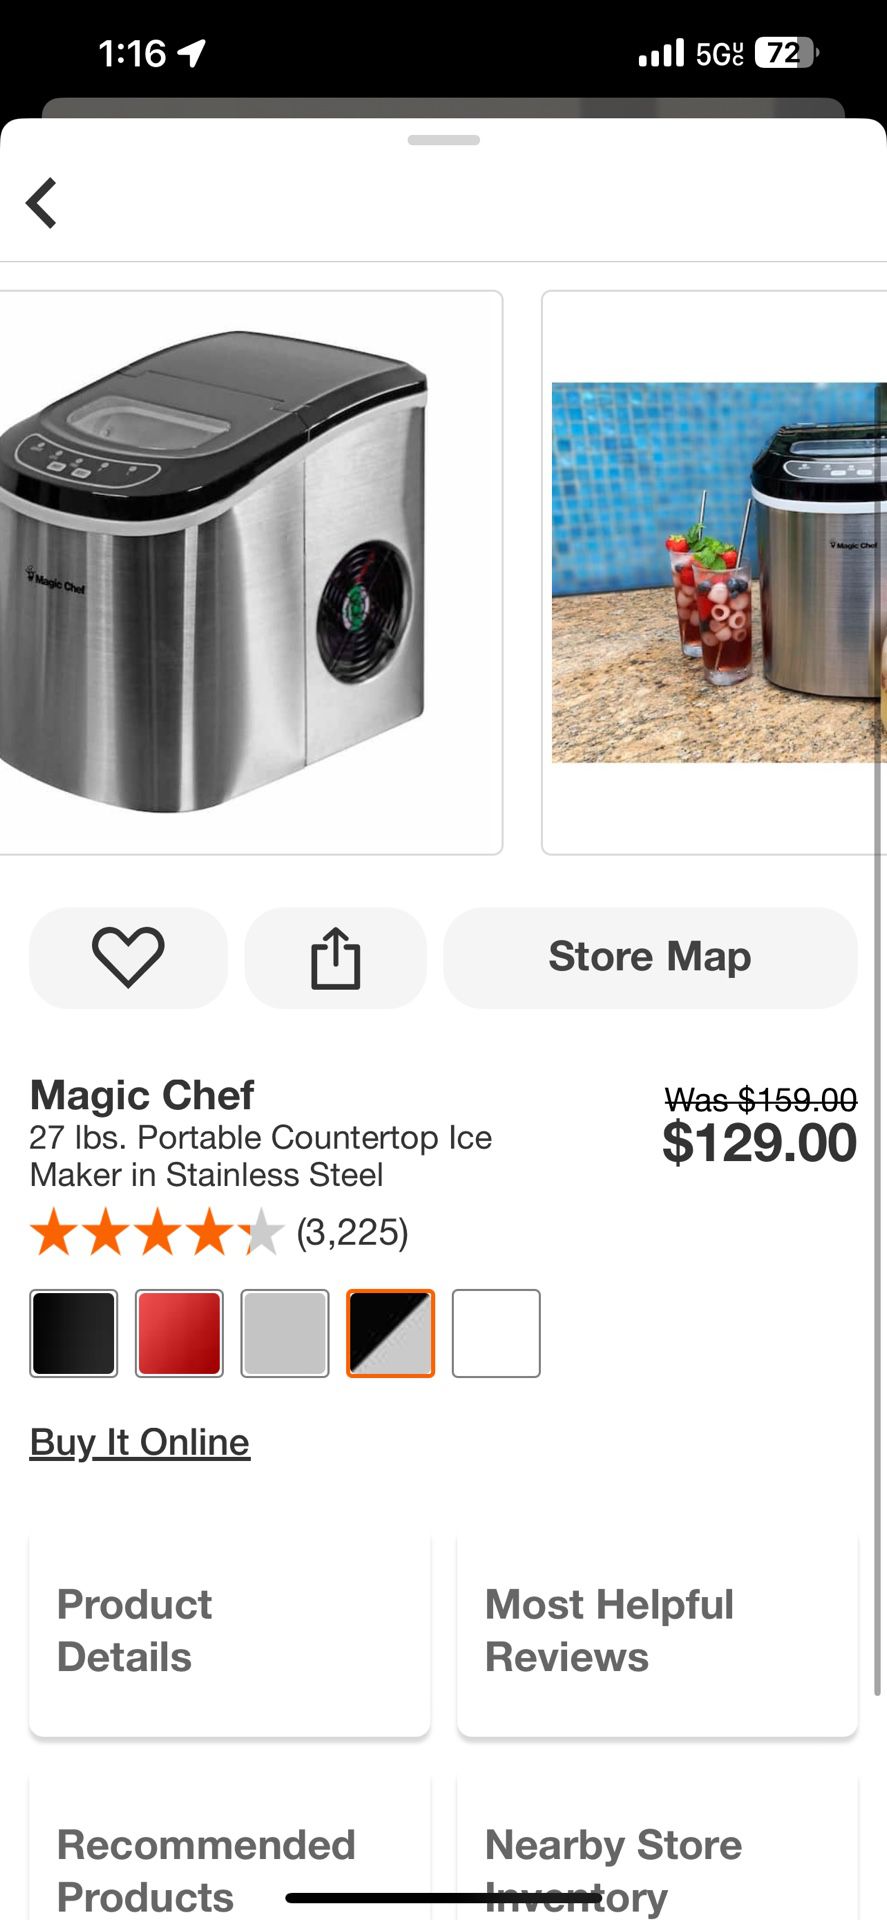 Magic Chef 27 Ibs. Portable Countertop Ice Maker in Stainless Steel